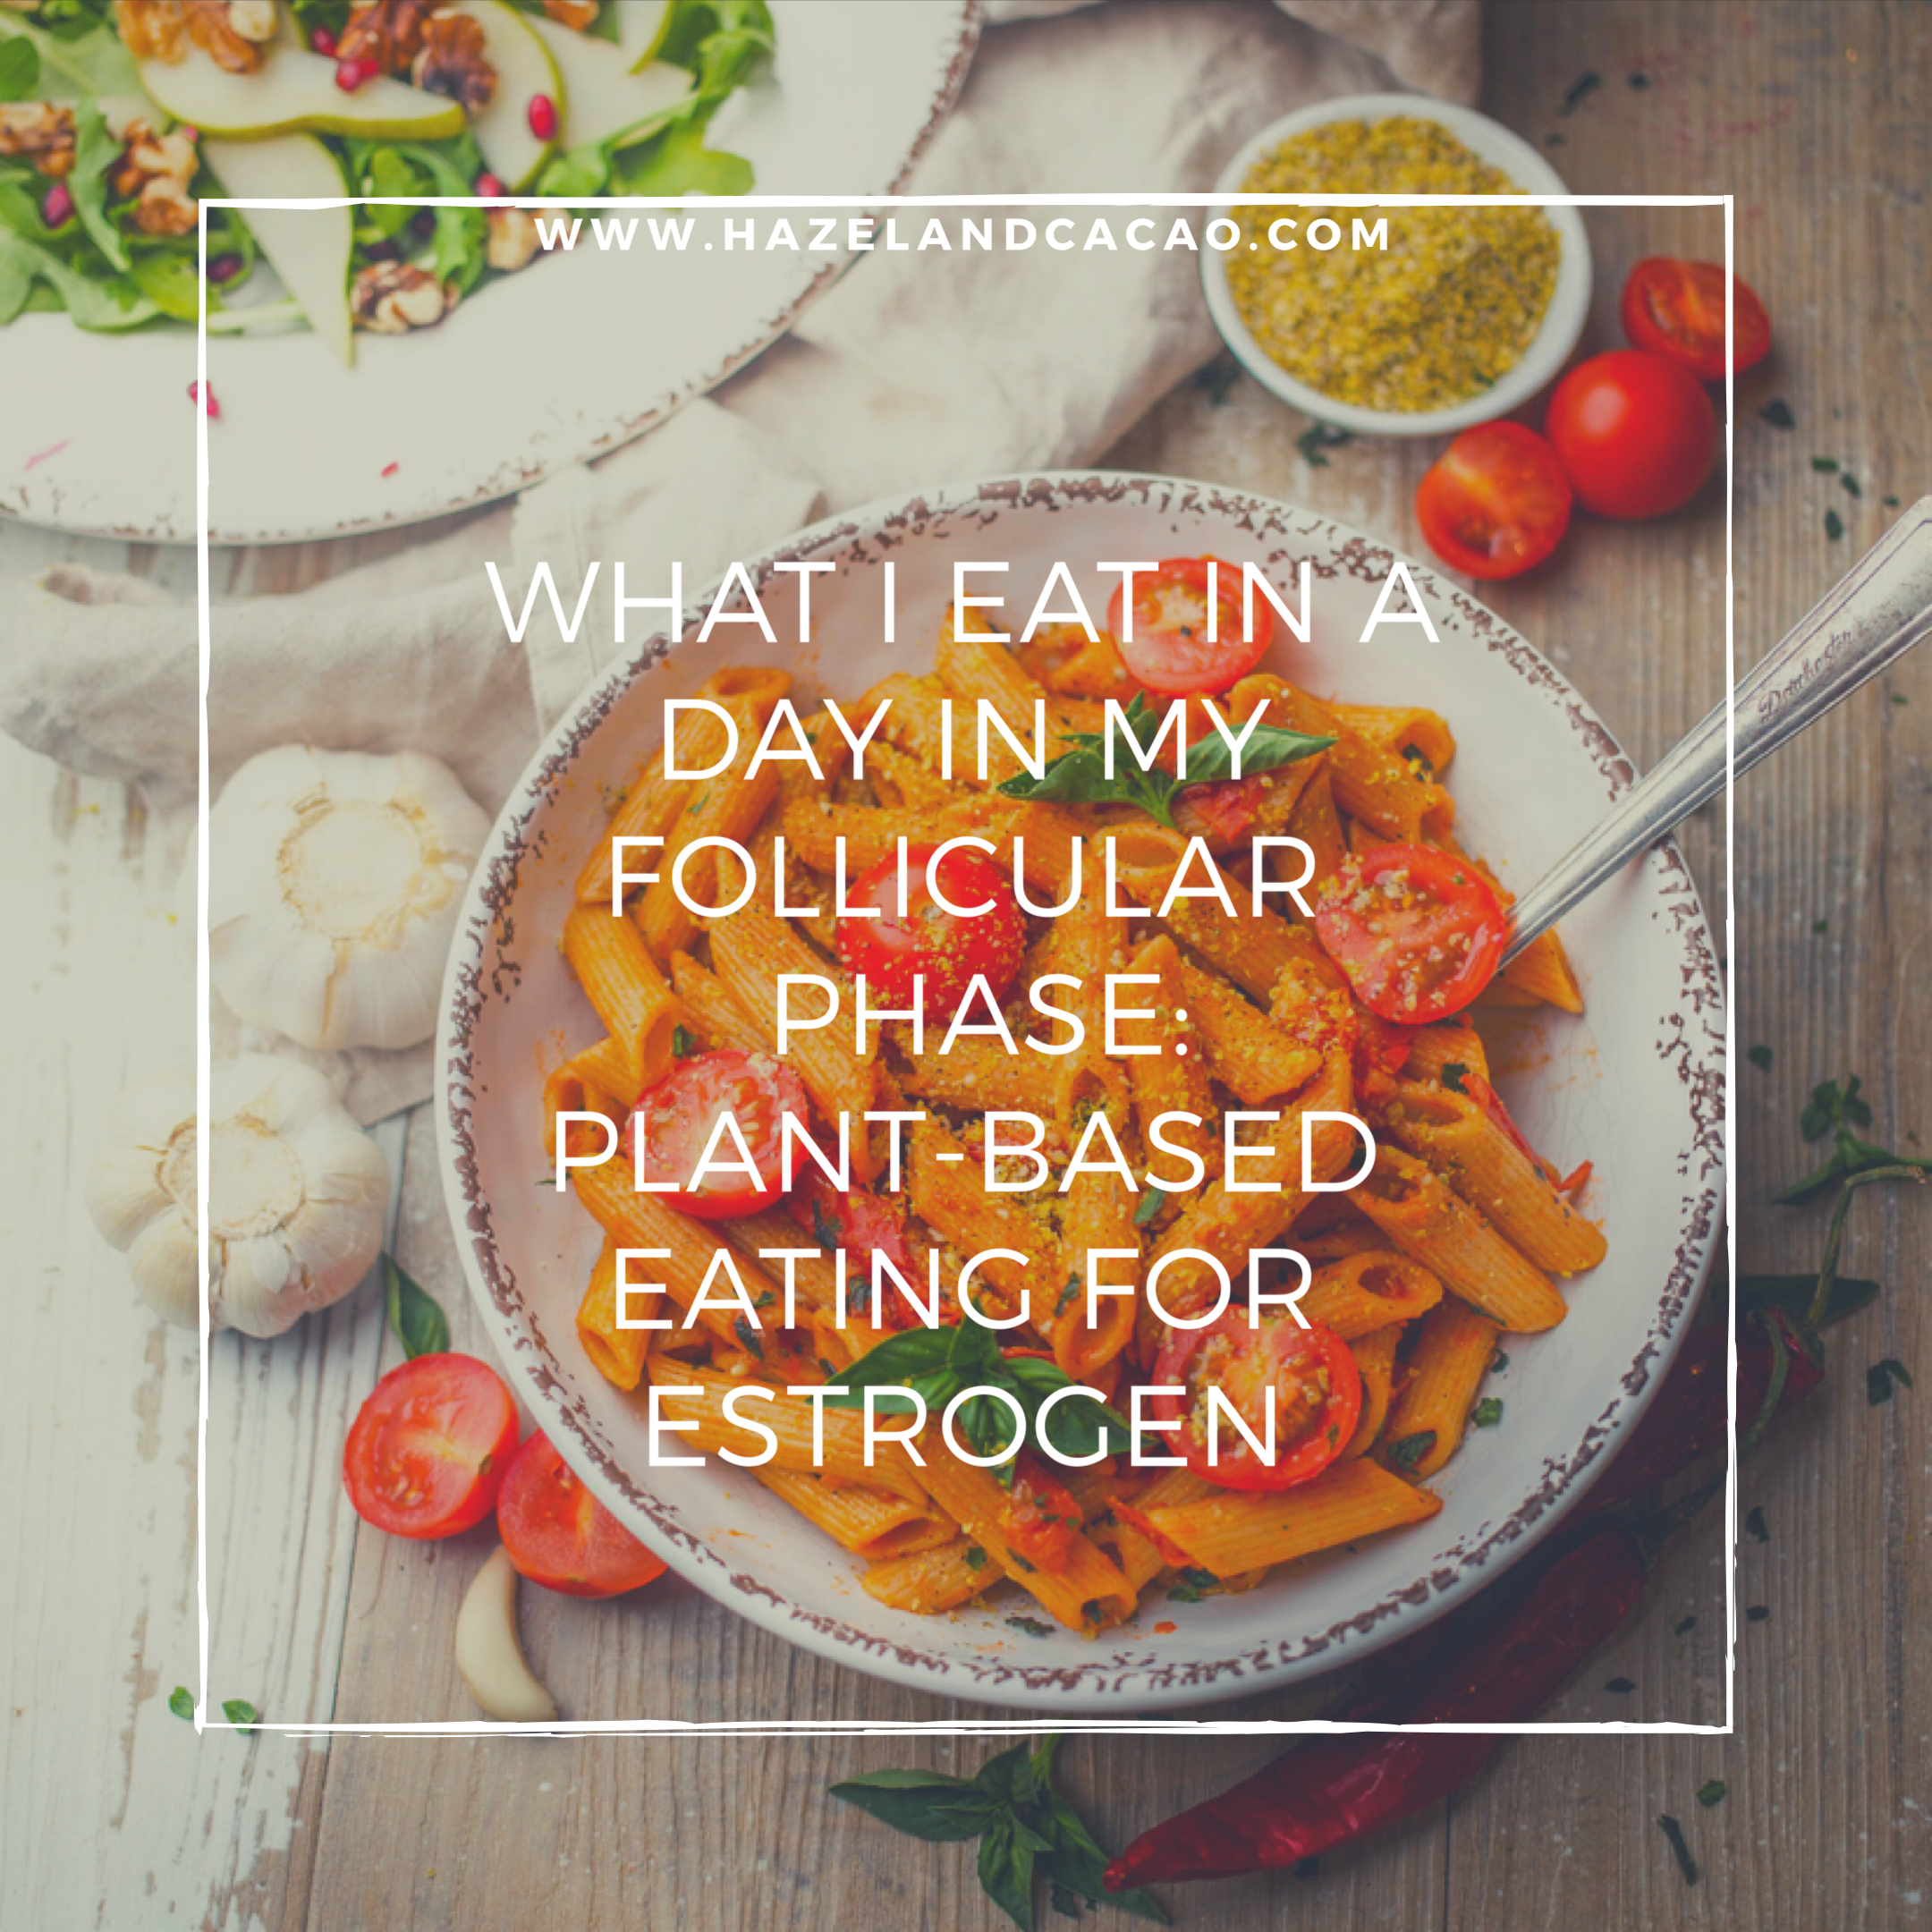 What I Eat in a Day in my Follicular Phase. Plant-Based eating for Estrogen